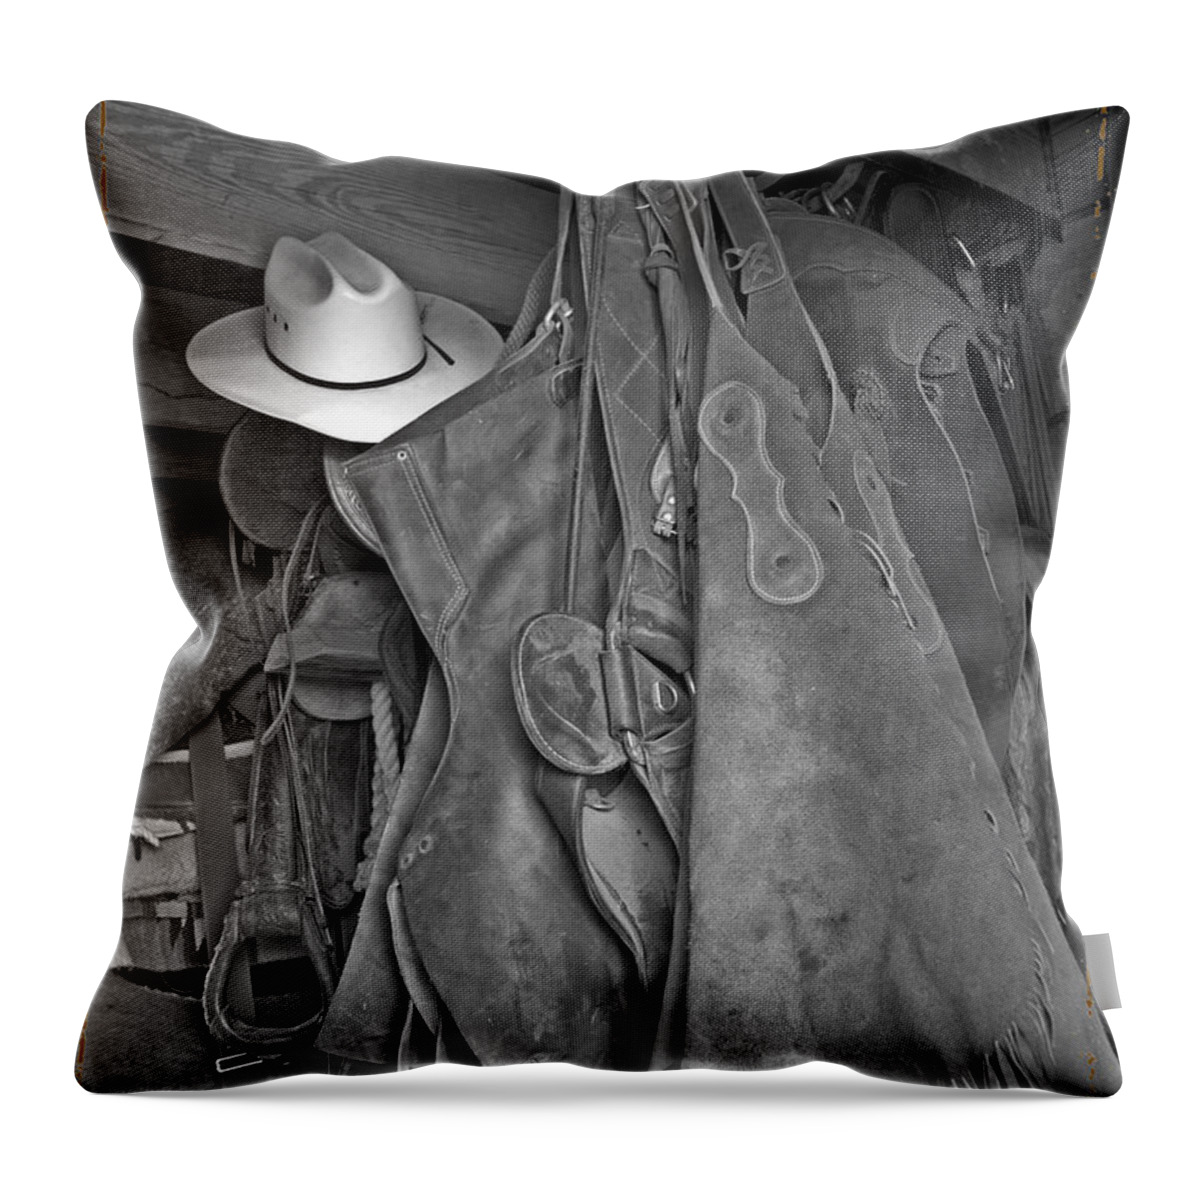  Cowboy Photographs Throw Pillow featuring the photograph Old Chaps New Hat by Mayhem Mediums